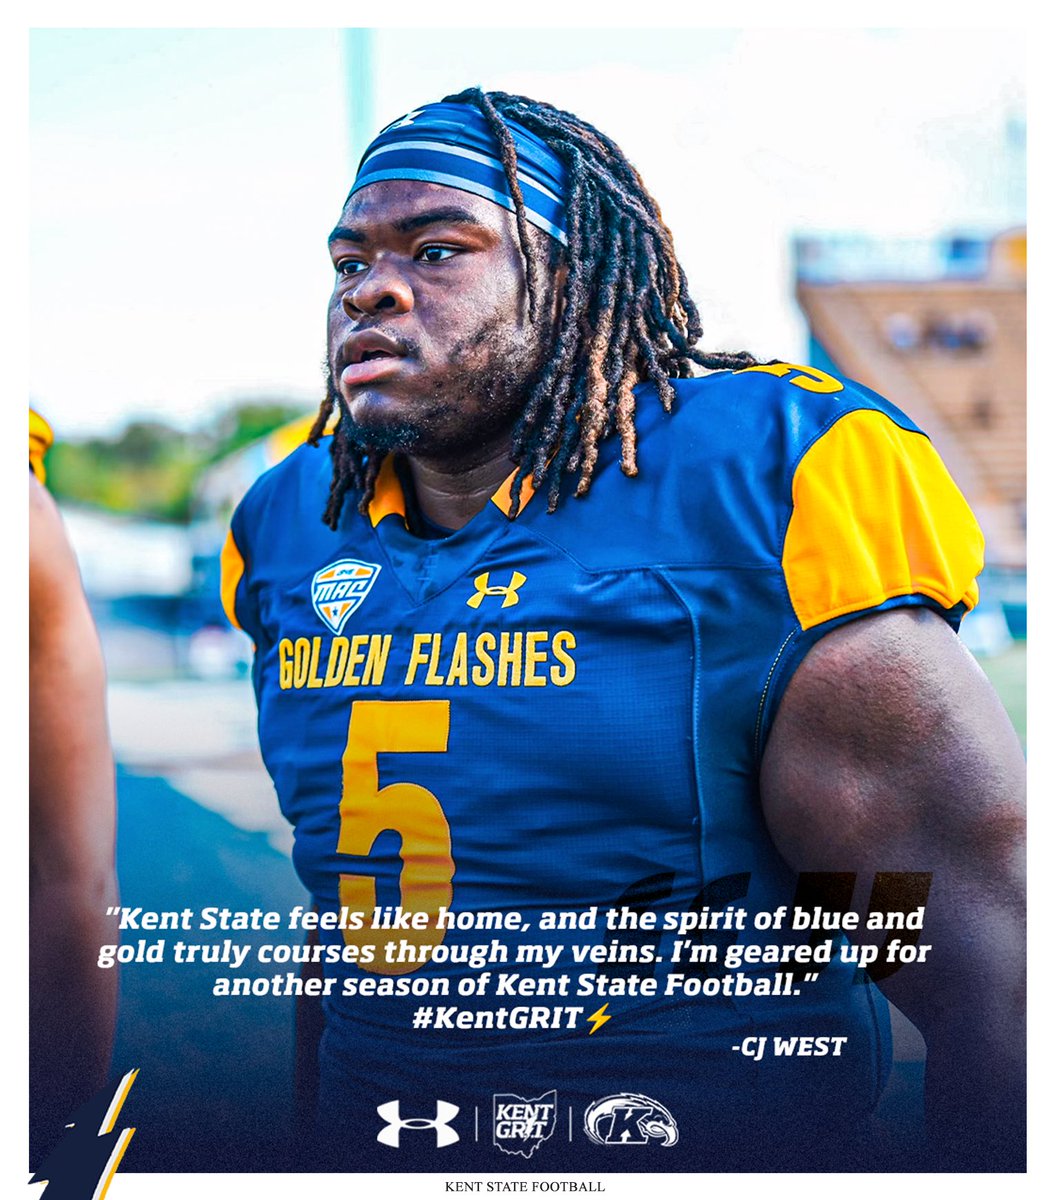 All-Conference DT - @CJWEST50 - Ready to continue tackling anything that comes his way. 💪 #KentGRIT⚡️